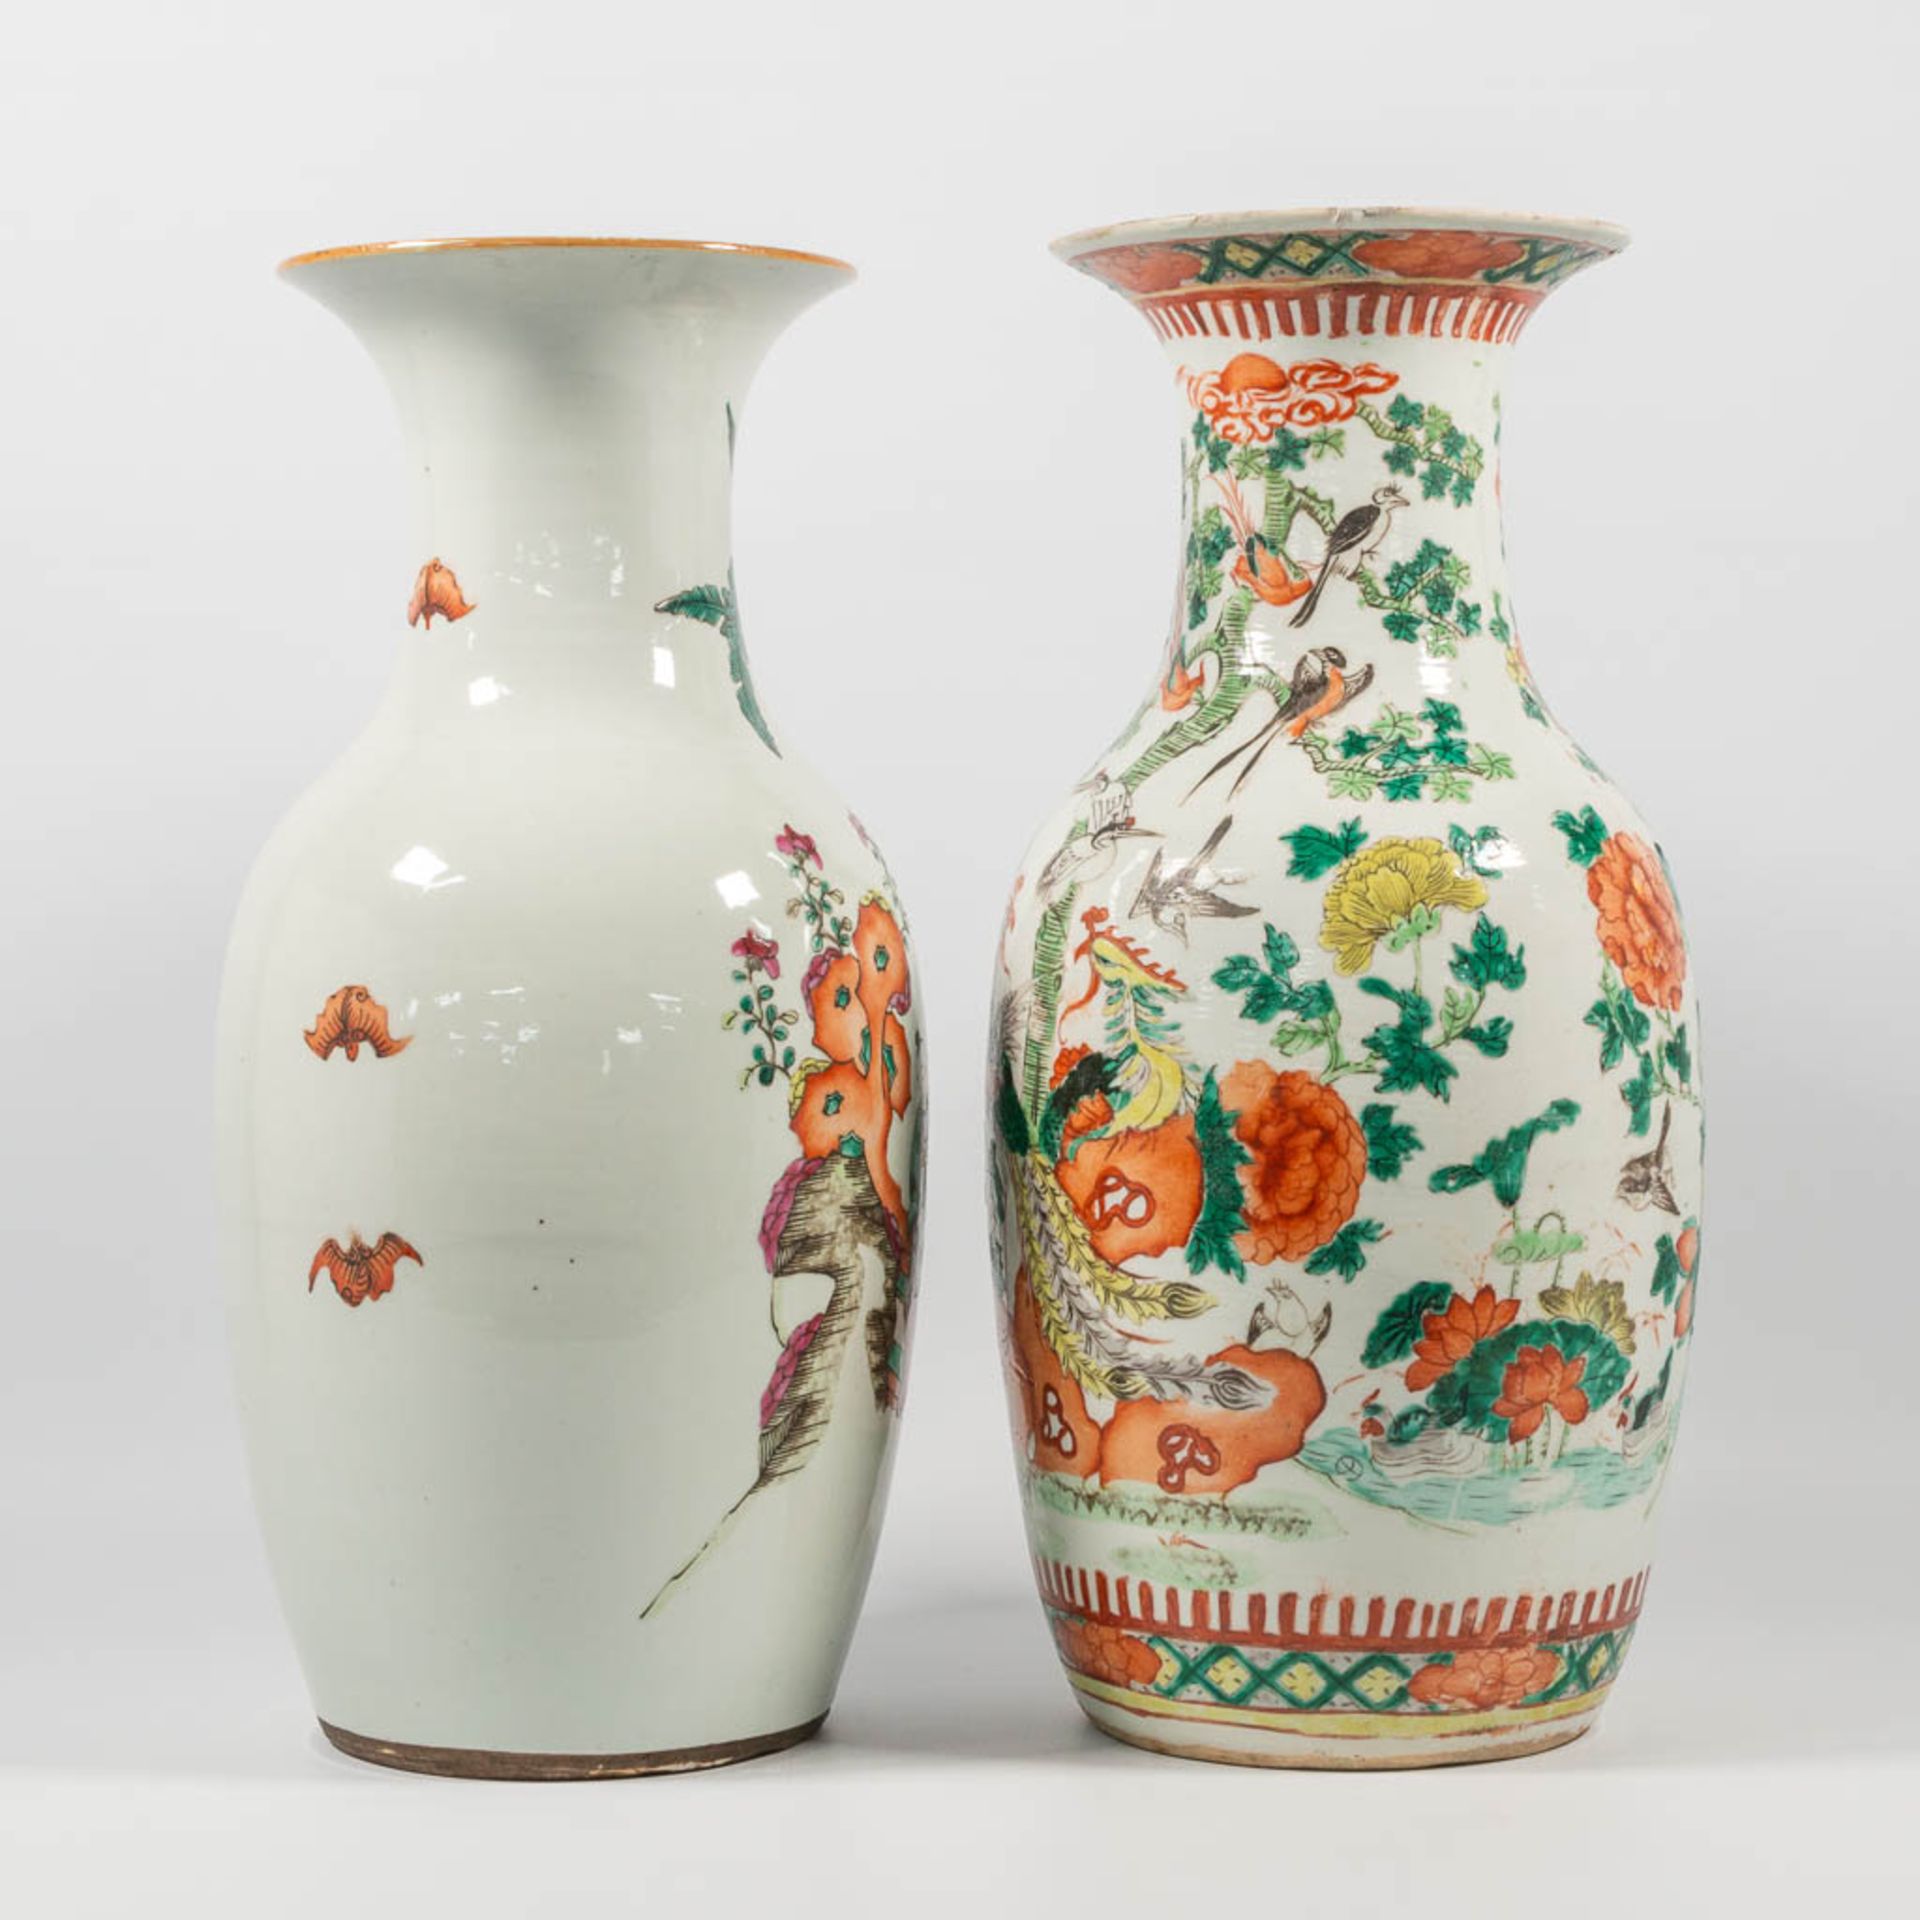 A collection of 2 Chinese vases, with decor of Ladies in court and peacocks. 19th/20th century. - Image 4 of 14